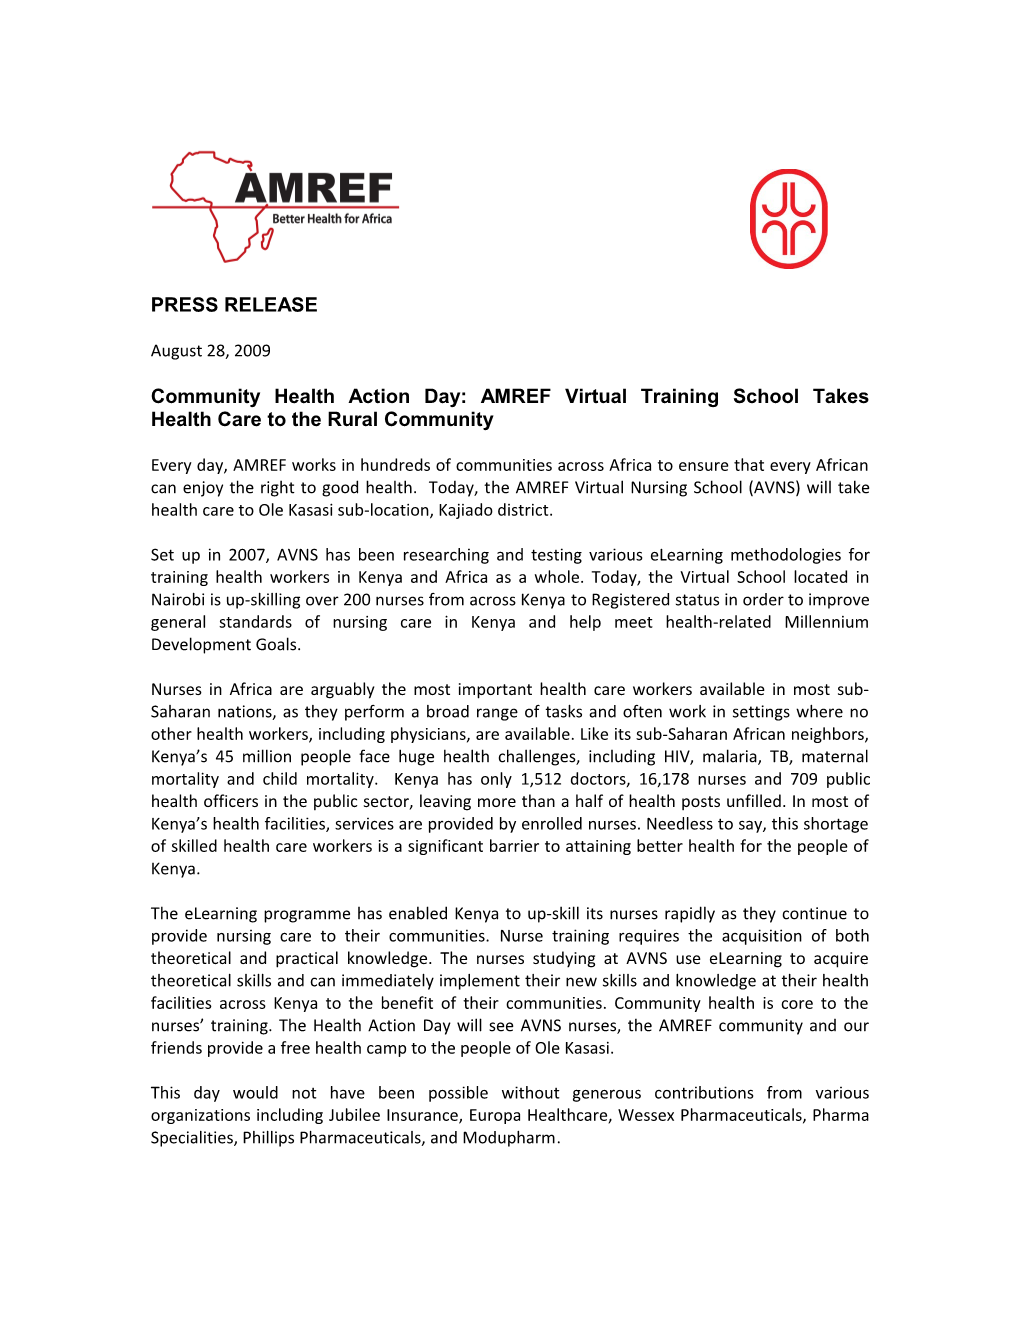 Community Health Action Day: AMREF Virtual Training School Takes Health Care to the Rural